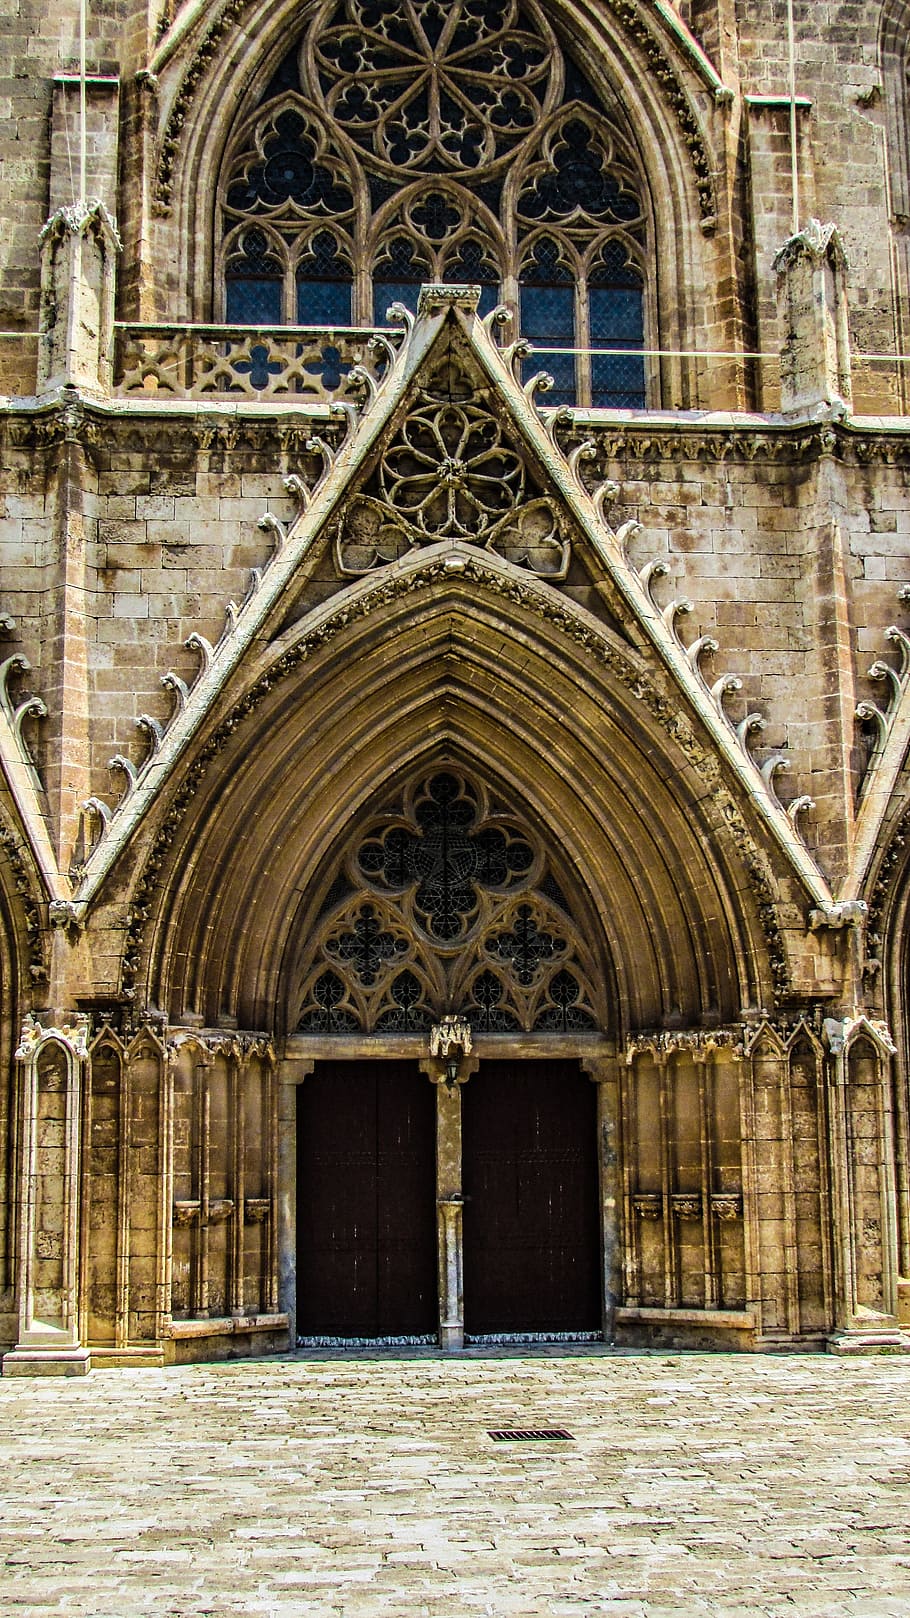 Cyprus, Famagusta, Church, ayios nikolaos, entrance, door, gate, cathedral, gothic, architecture